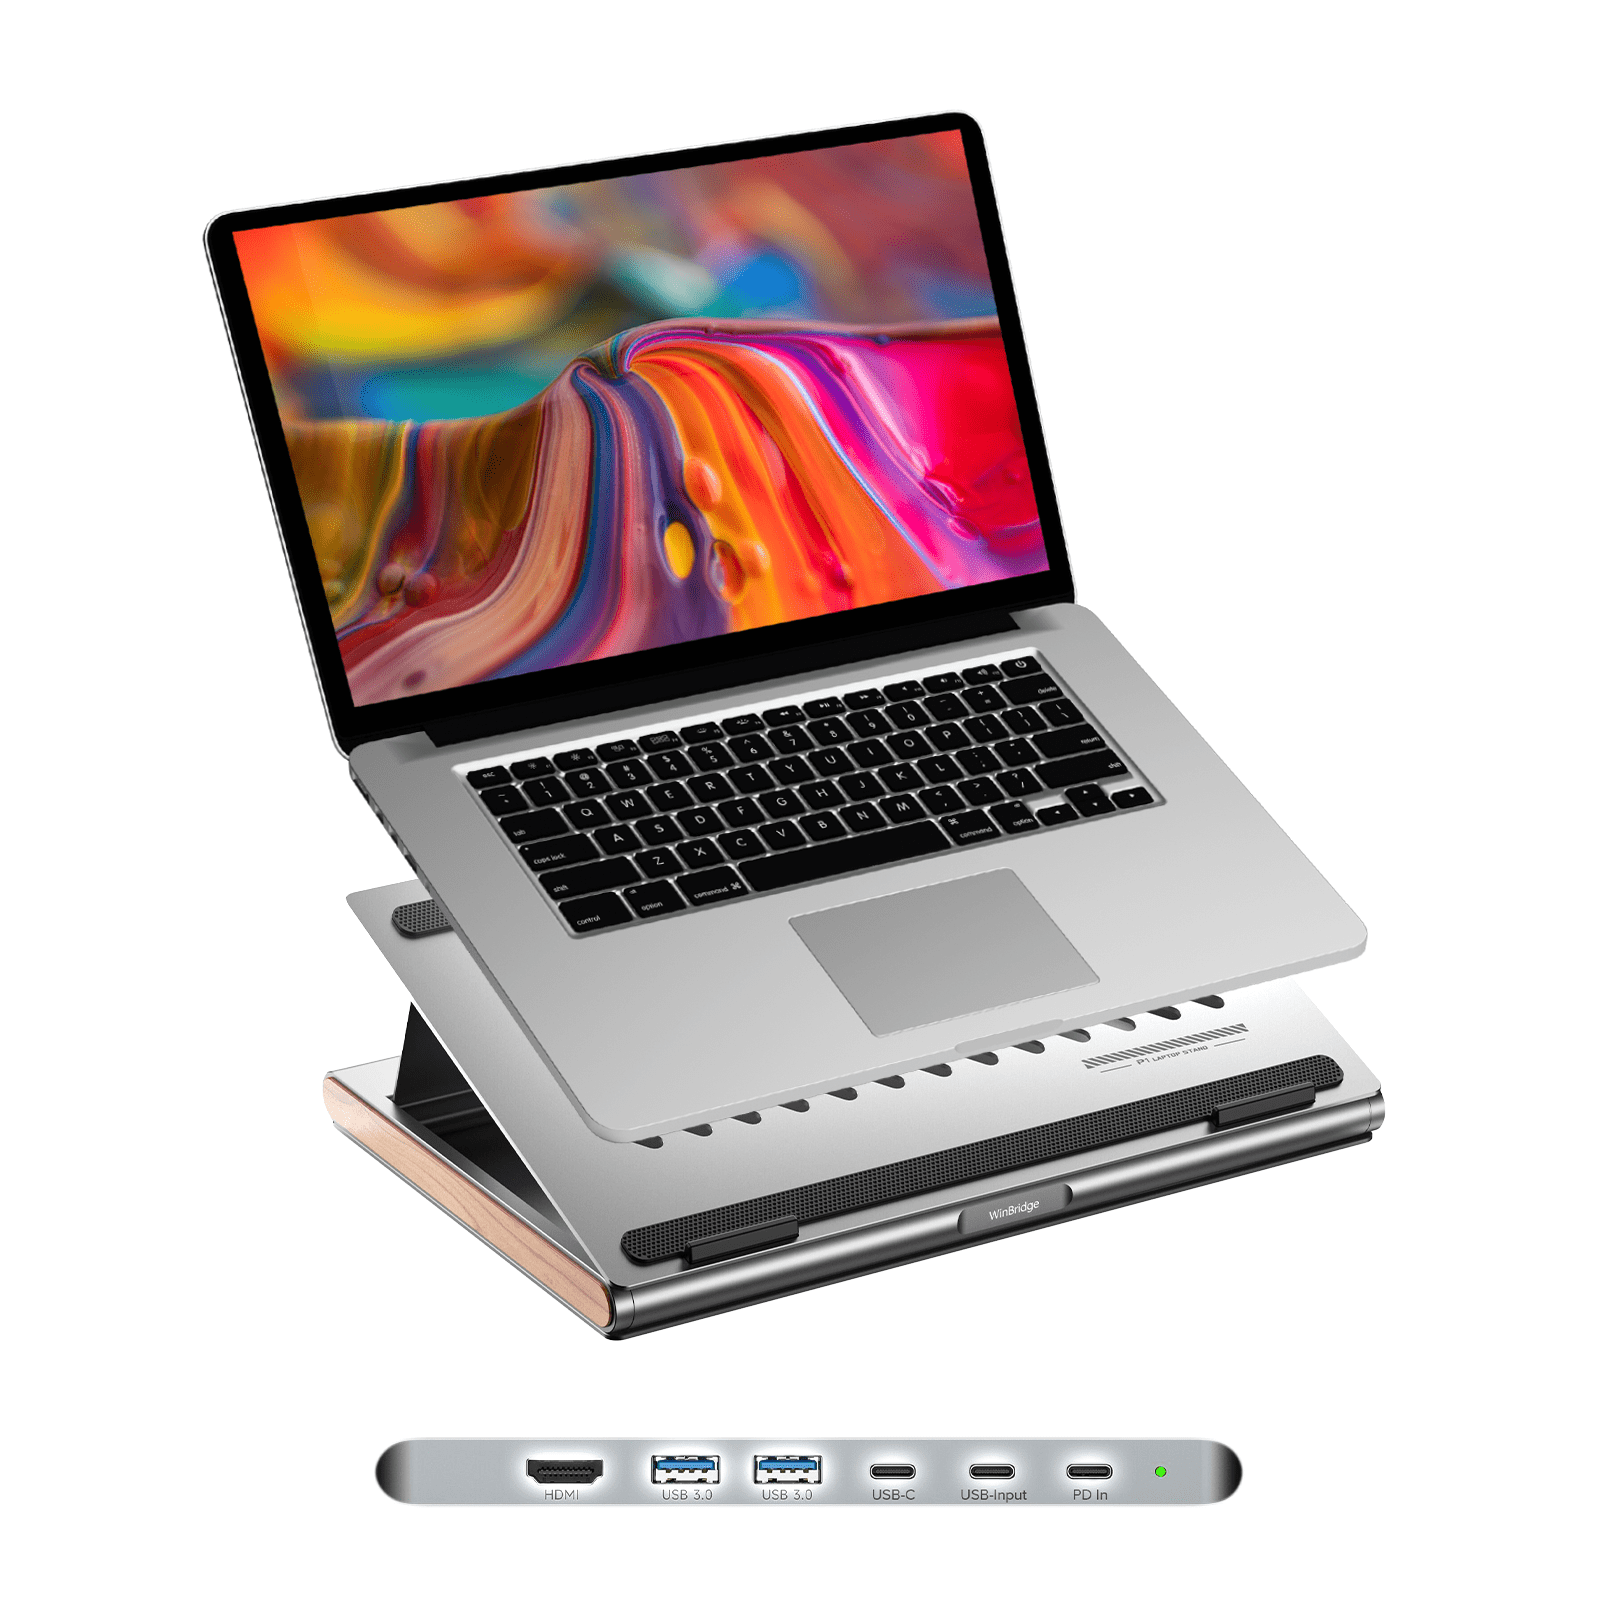 WinBridge Aluminum Alloy Laptop Stand with 6-in 1 USB C Hub for Desk, 4K HDMI, 2 USB 3.0, 100W PD Charging, Stable & Ventilated, Adjustable Height, Fits All MacBook, Laptops up to 15.6 inches